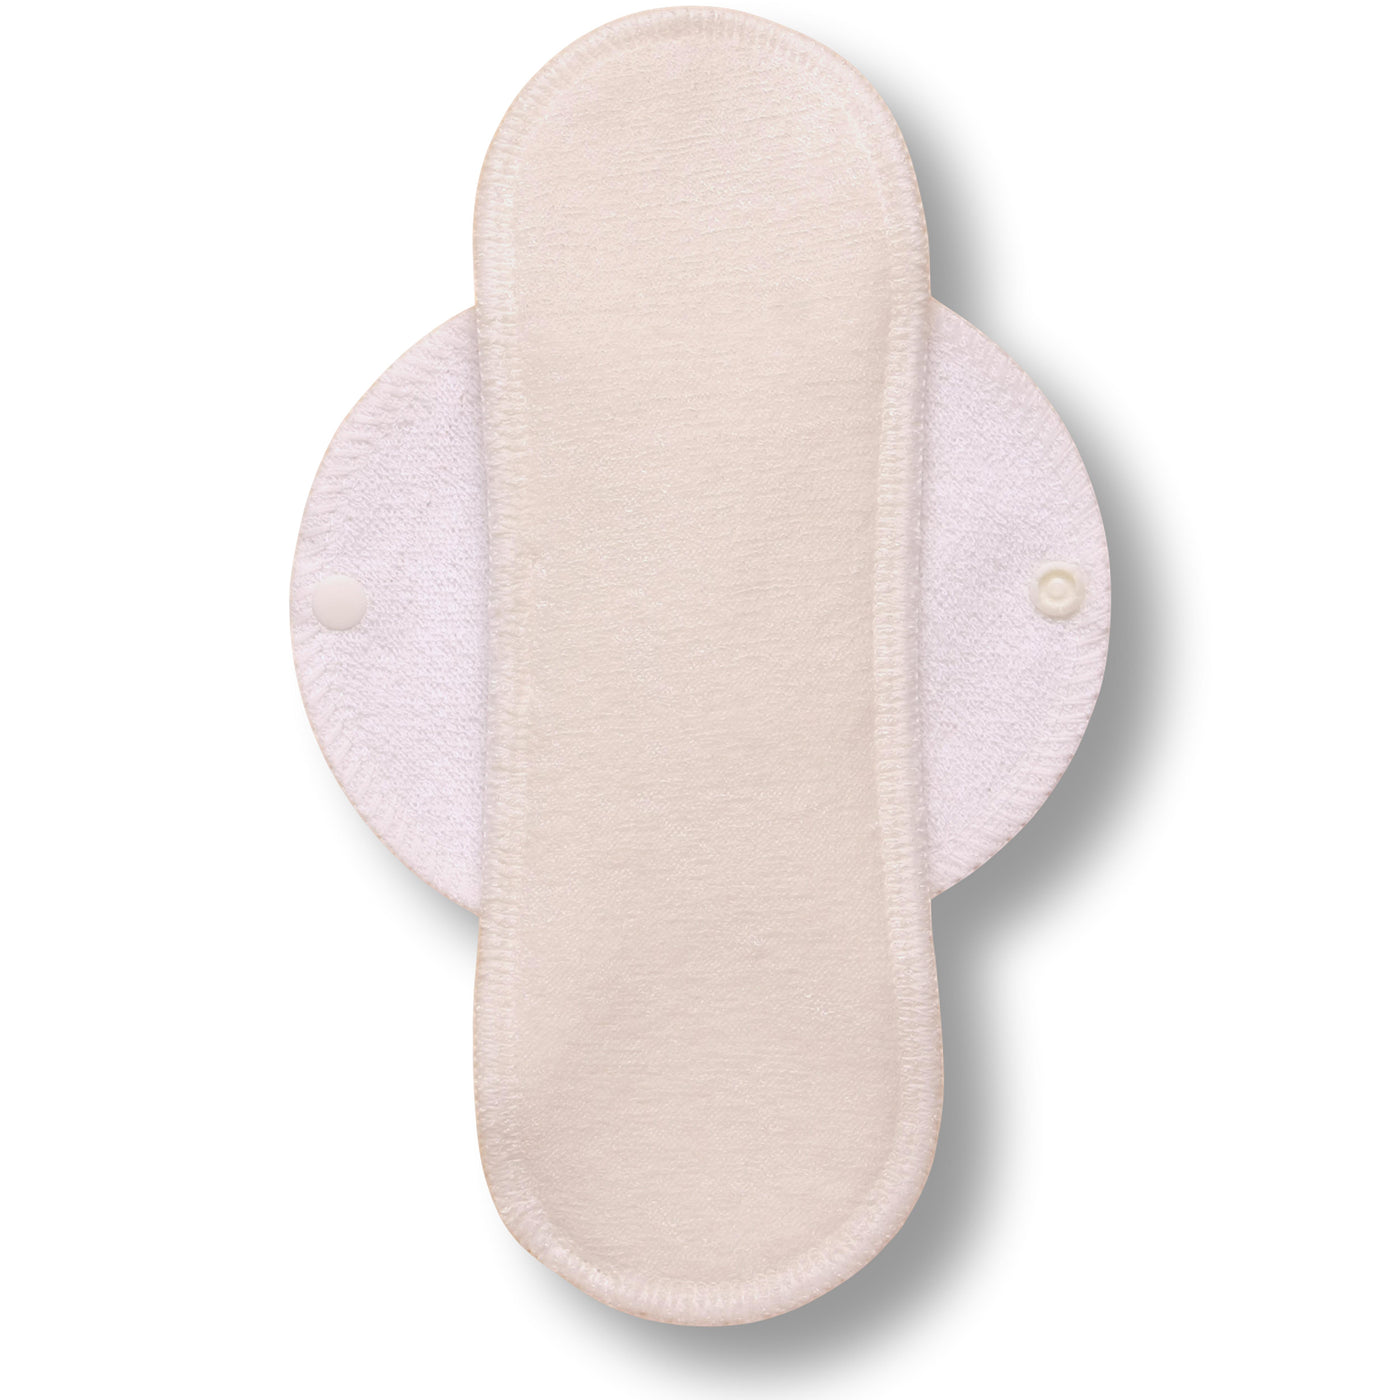 Reusable Menstrual Pads, 6-Pack Bamboo Reusable Sanitary Towels with Wings (size S & M), MADE IN EU, for Menstrual Periods and Incontinence; EXTRA Double Wet Bag with Strap; Washable Menstrual Cloth